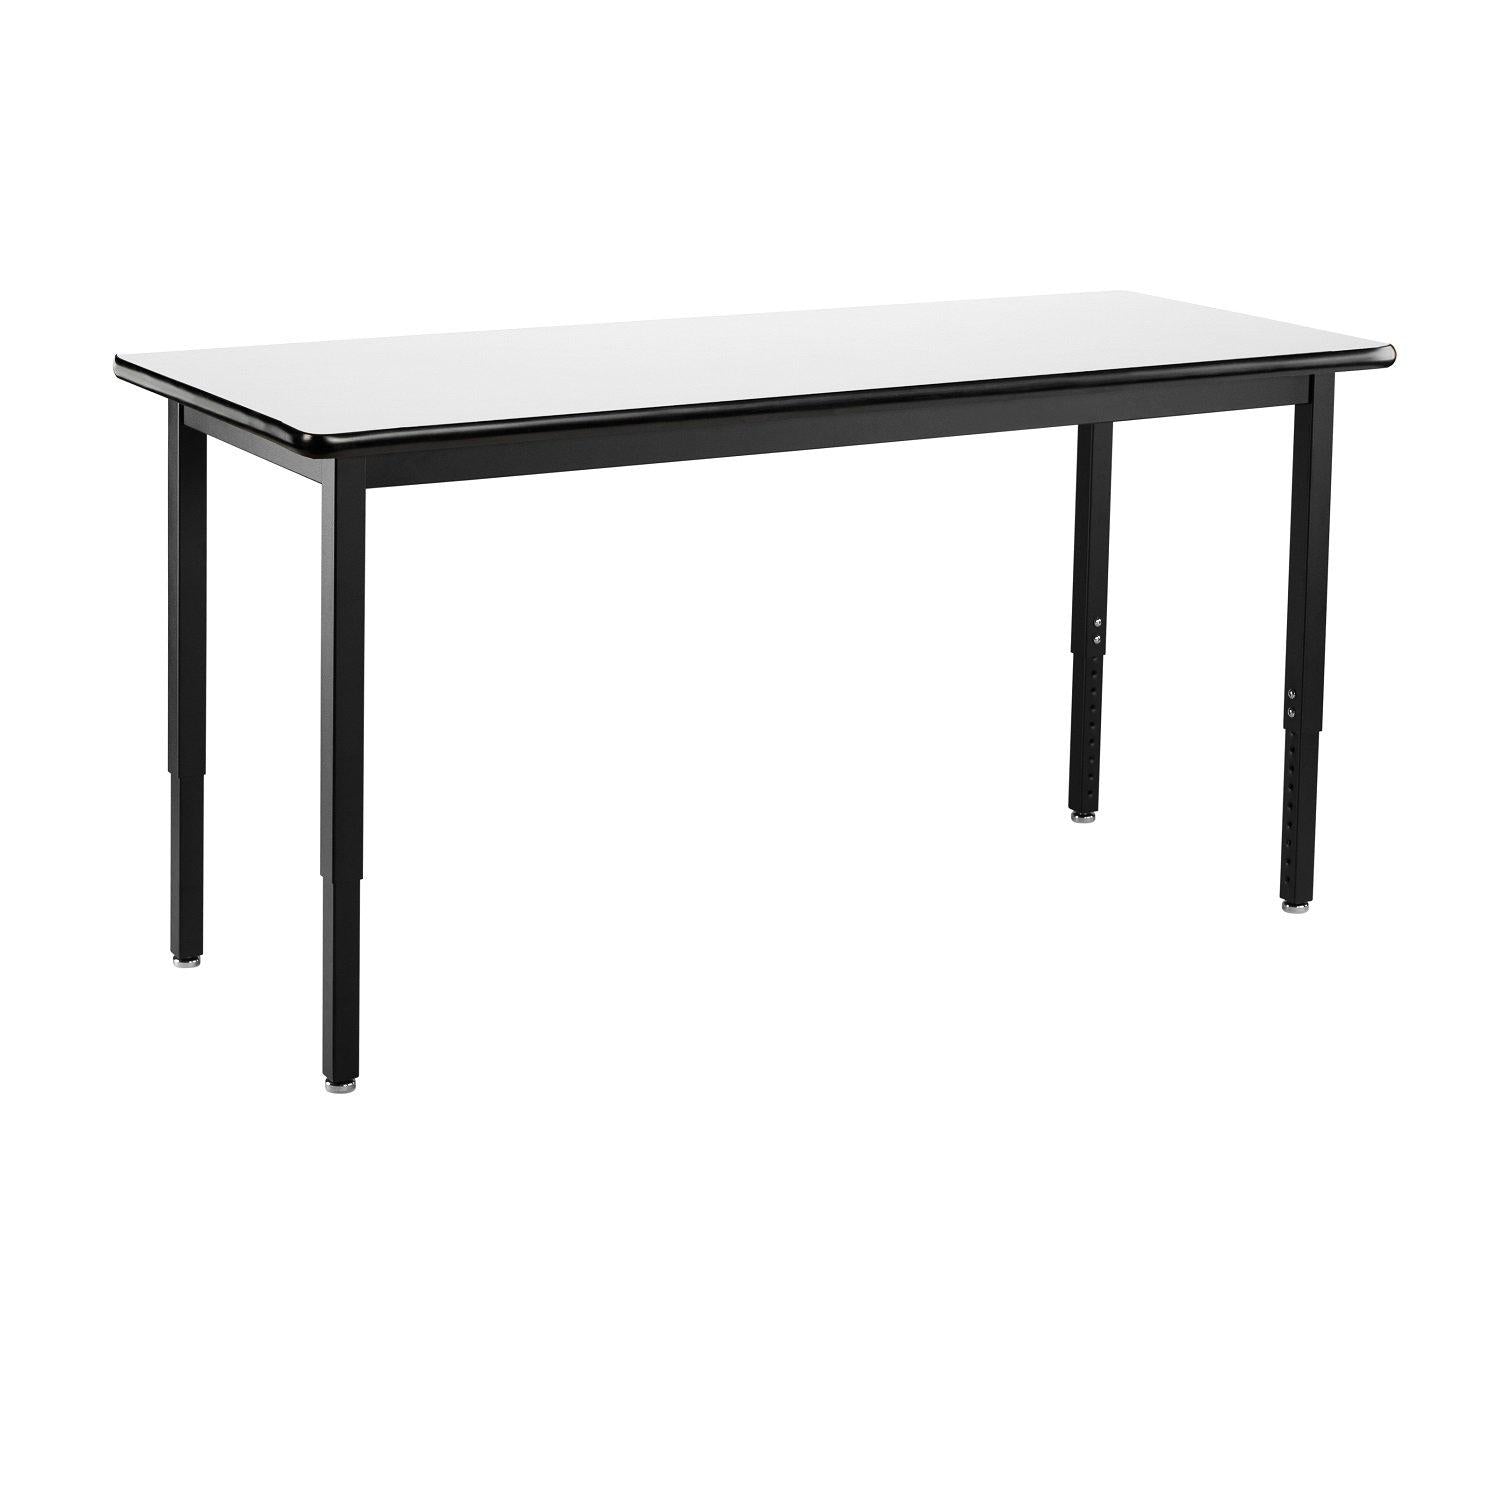 Heavy-Duty Height-Adjustable Utility Table, Black Frame, 30" x 42", Whiteboard High-Pressure Laminate Top